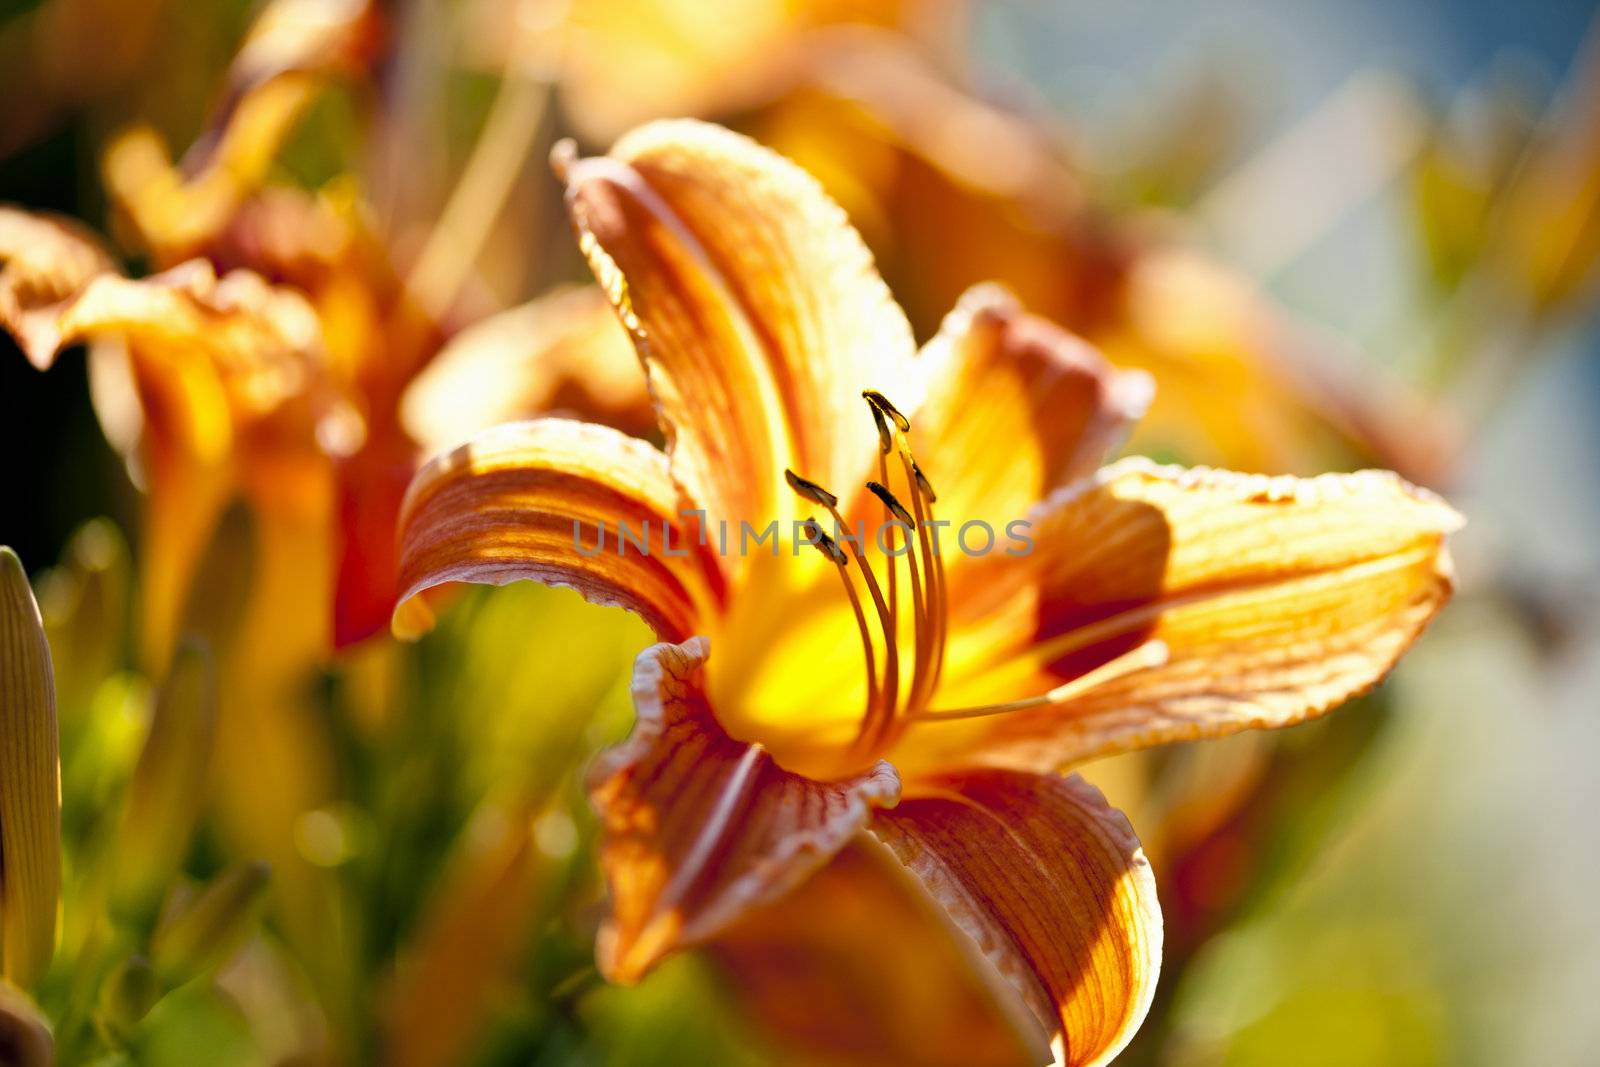 Tiger lily flower by elenathewise